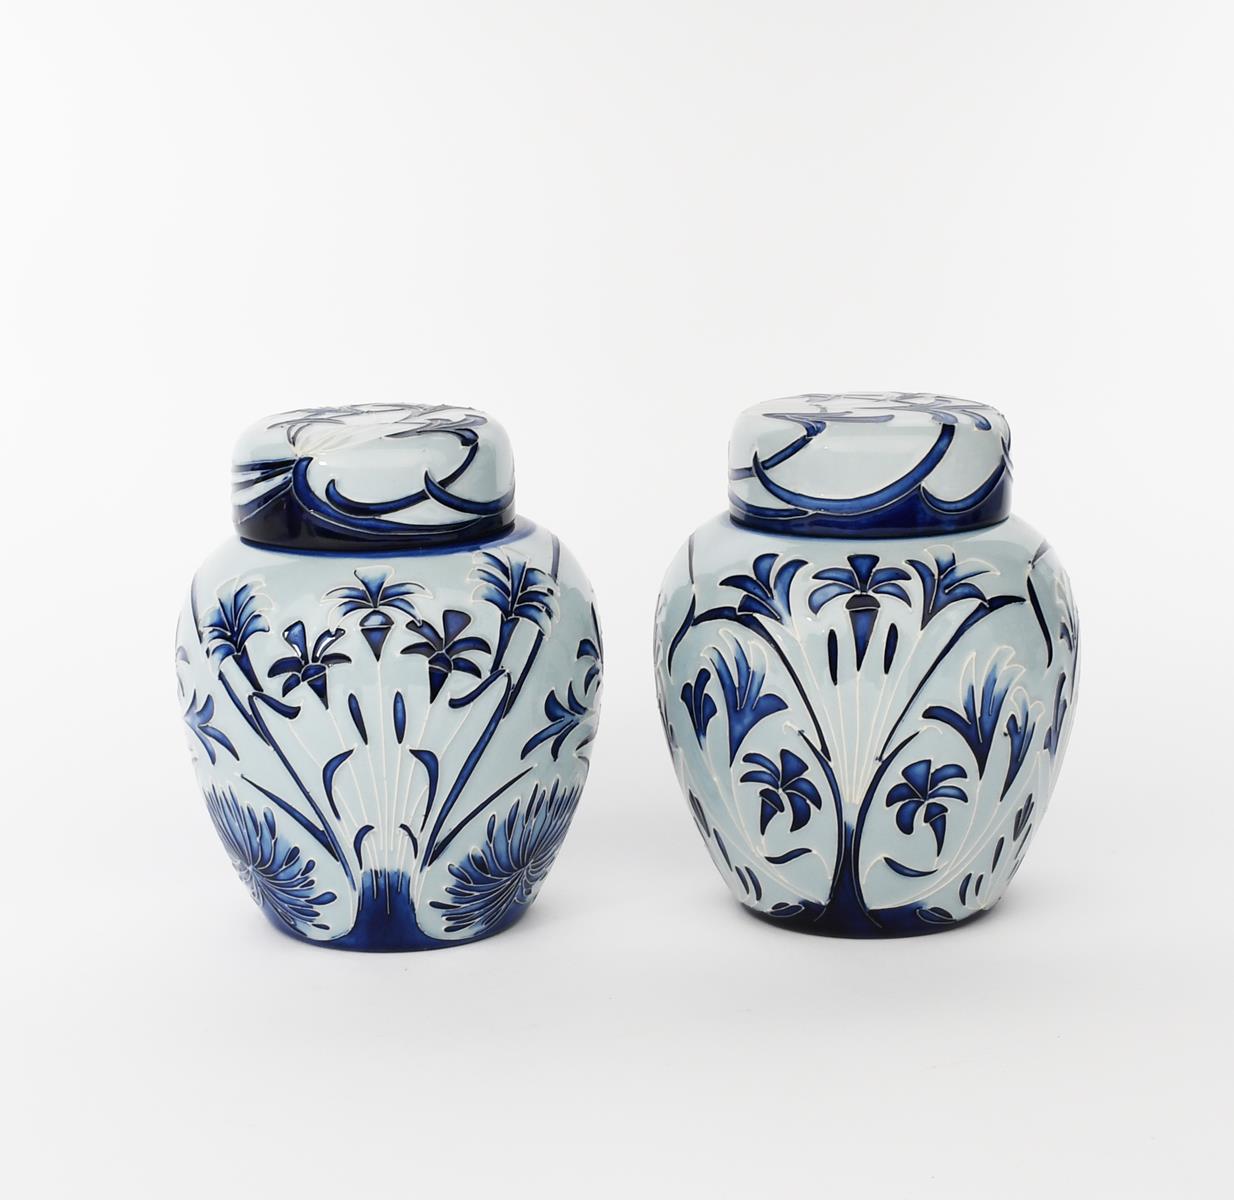 'Midnight Blue' a pair of modern Moorcroft Pottery ginger jar and covers, painted in shades of